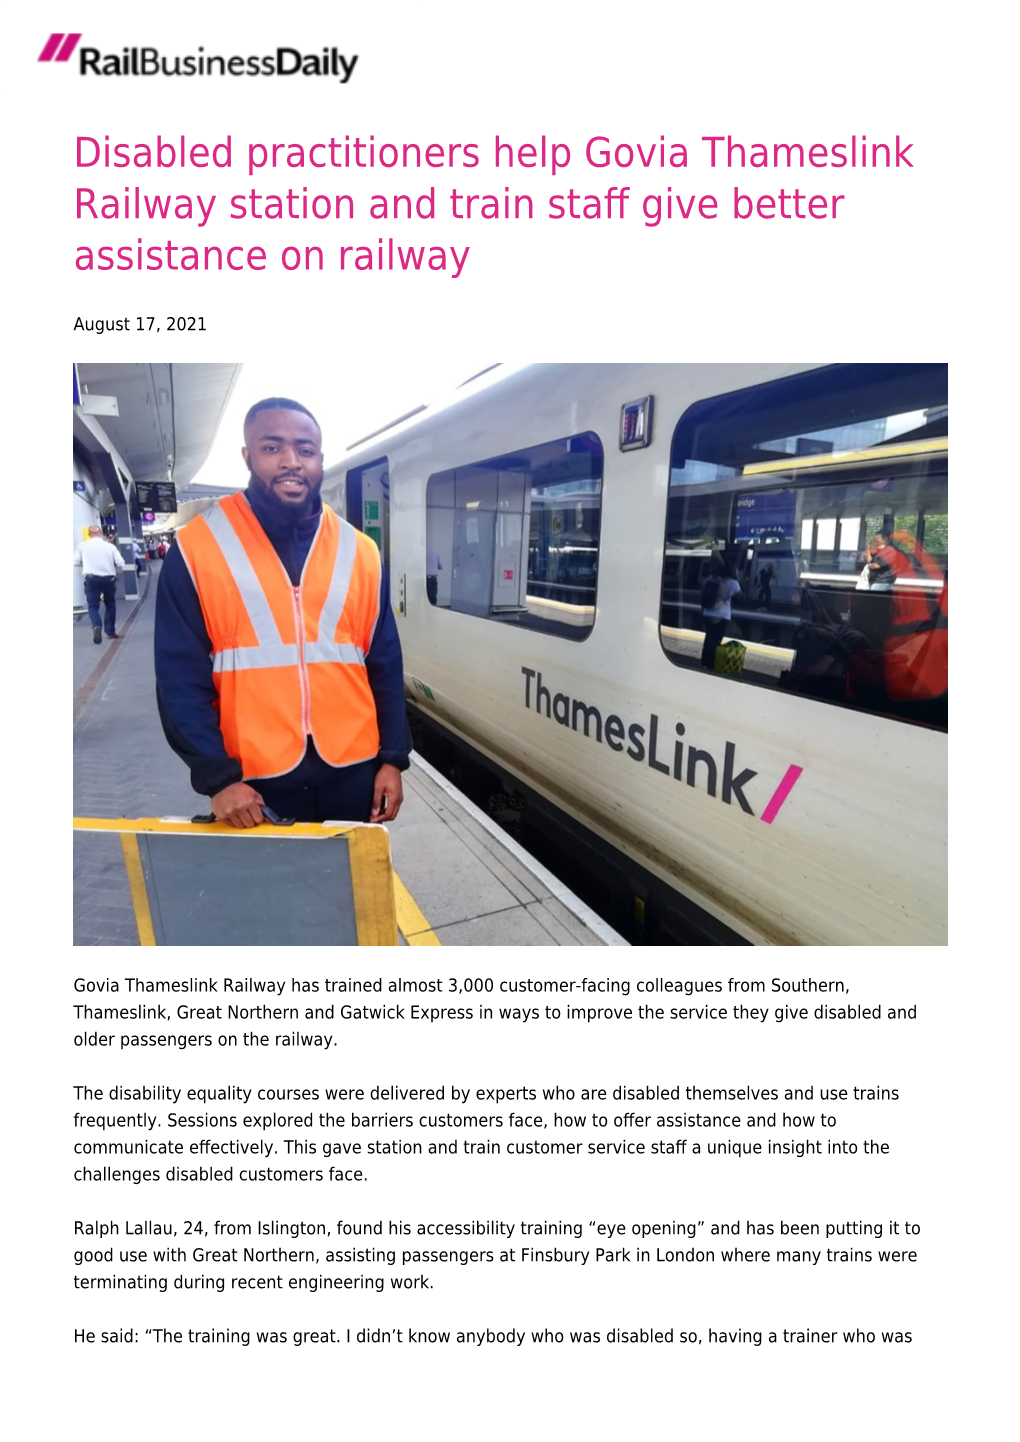 Disabled Practitioners Help Govia Thameslink Railway Station and Train Staﬀ Give Better Assistance on Railway